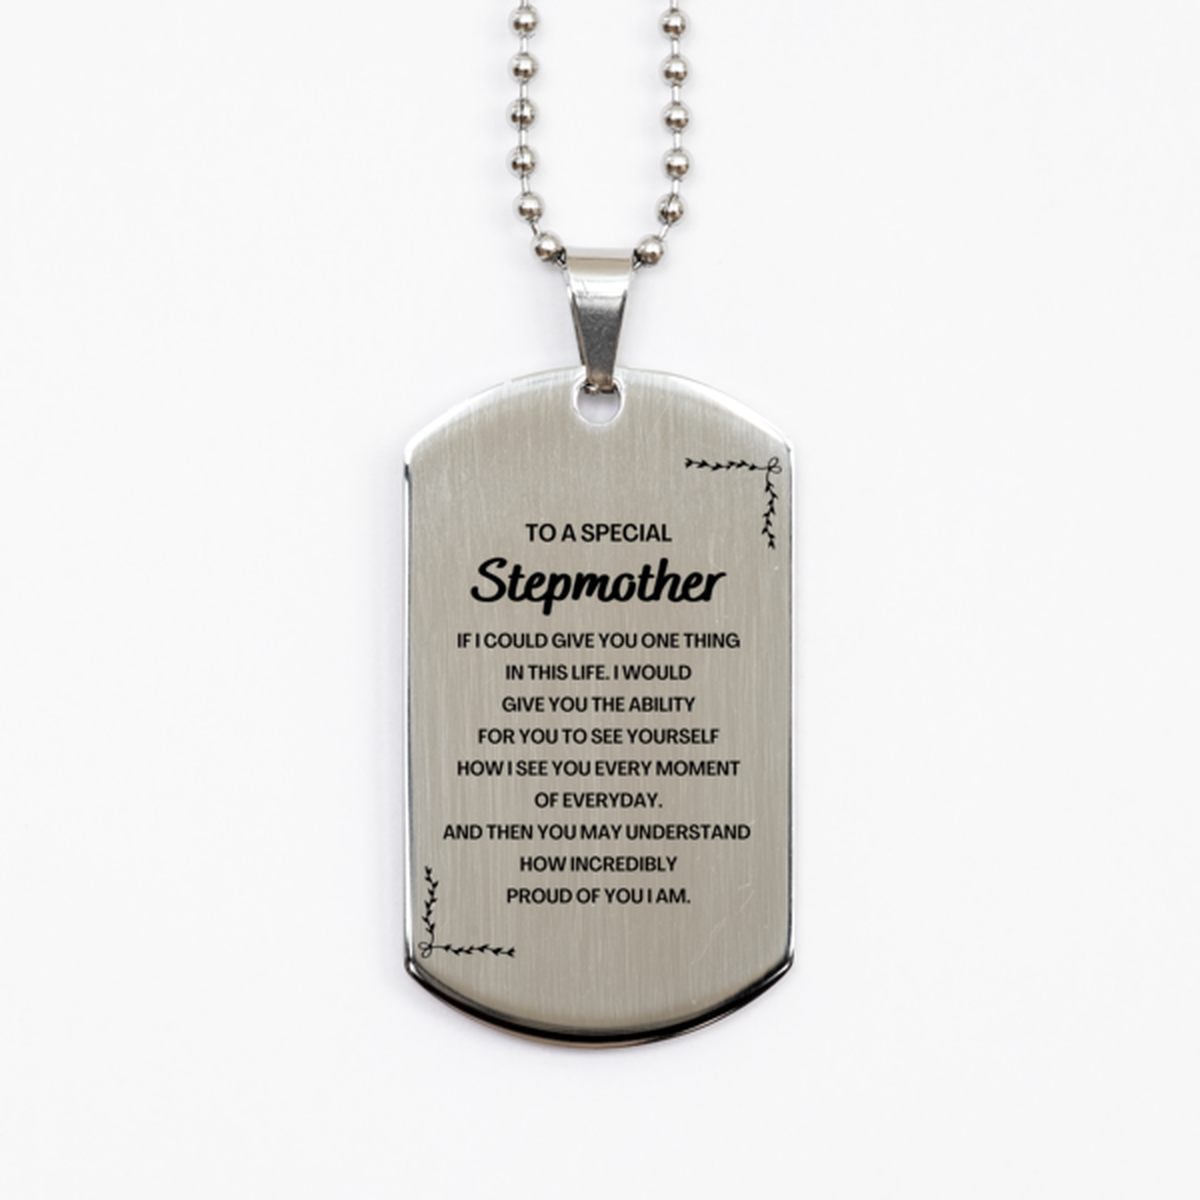 To My Stepmother Silver Dog Tag, Gifts For Stepmother Engraved, Inspirational Gifts for Christmas Birthday, Epic Gifts for Stepmother To A Special Stepmother how incredibly proud of you I am